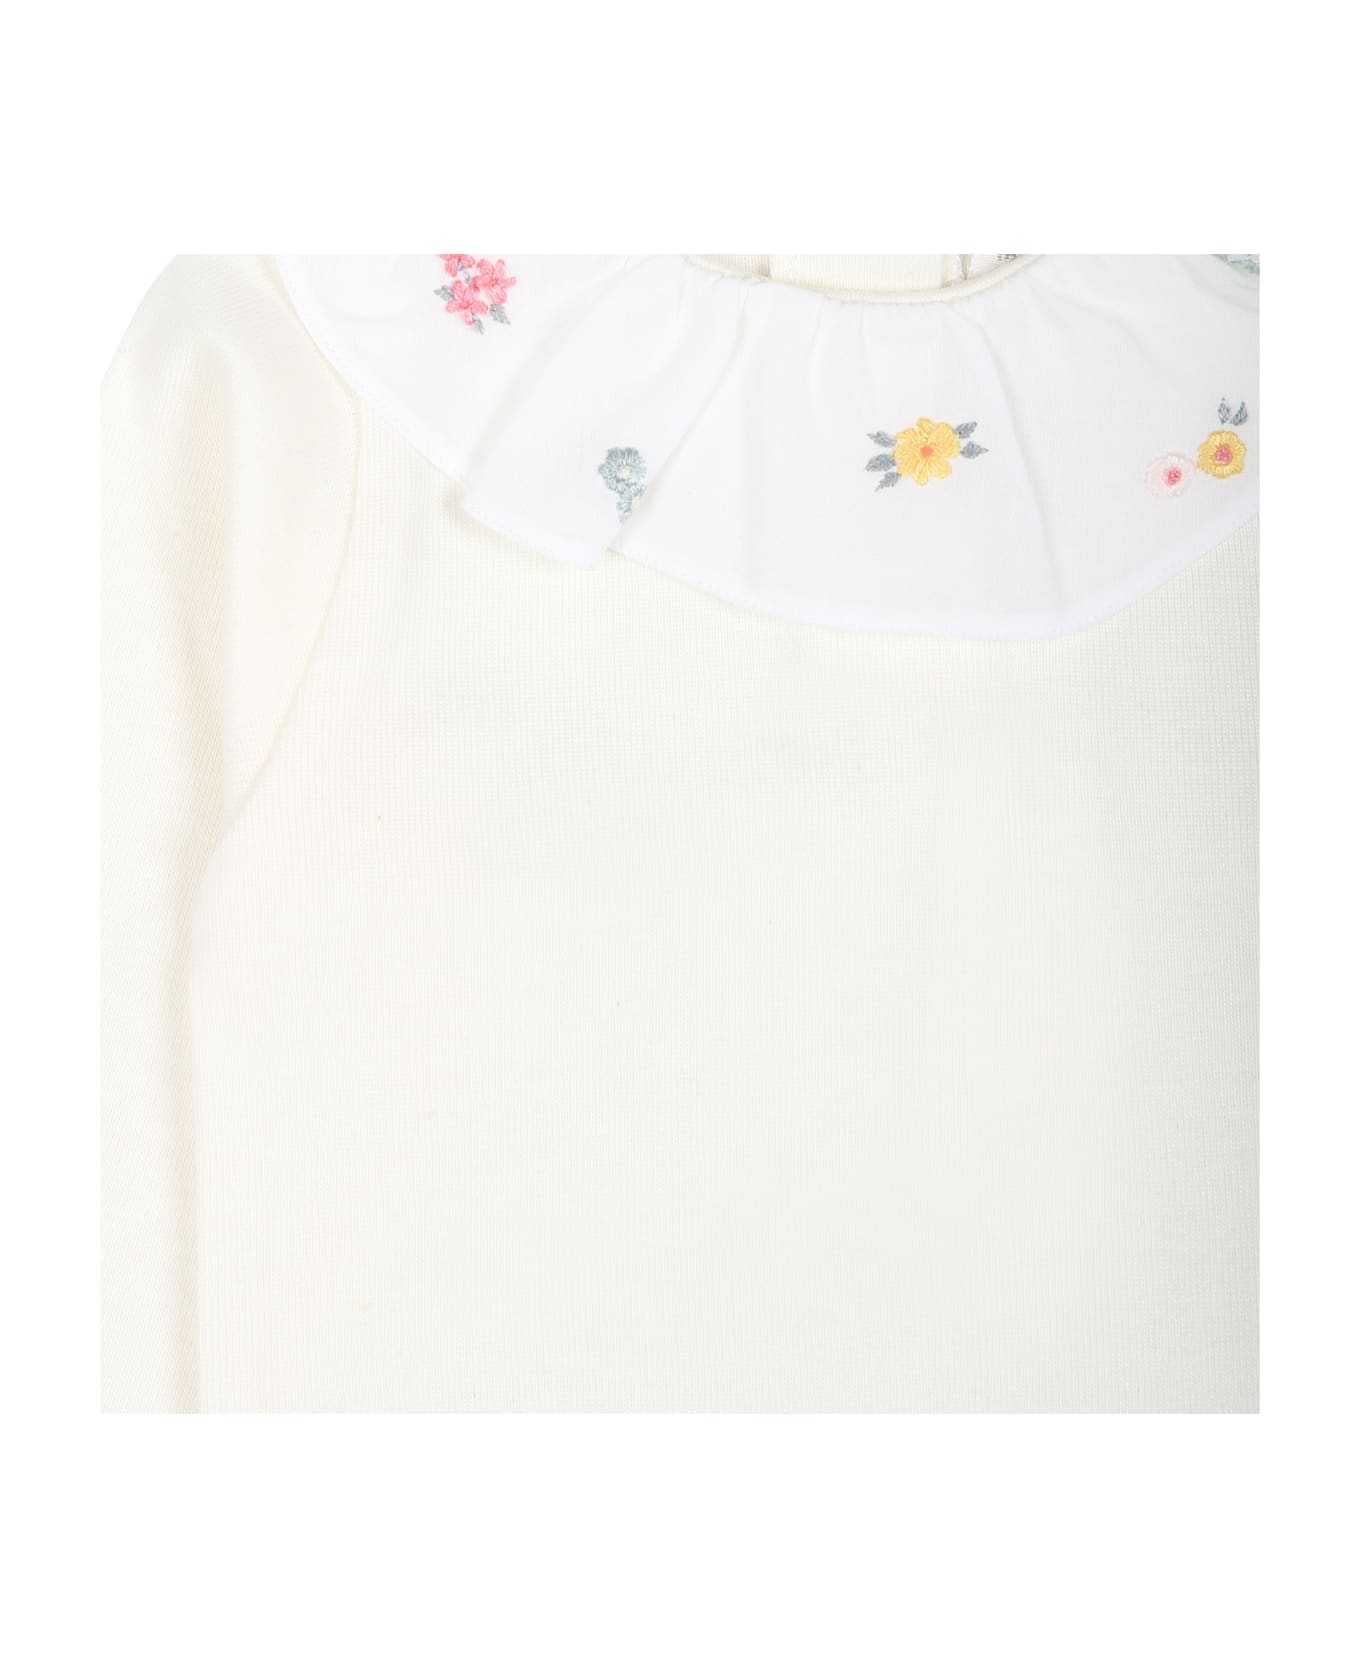 Bonpoint White Bodysuit For Baby Girl With Flowers - White